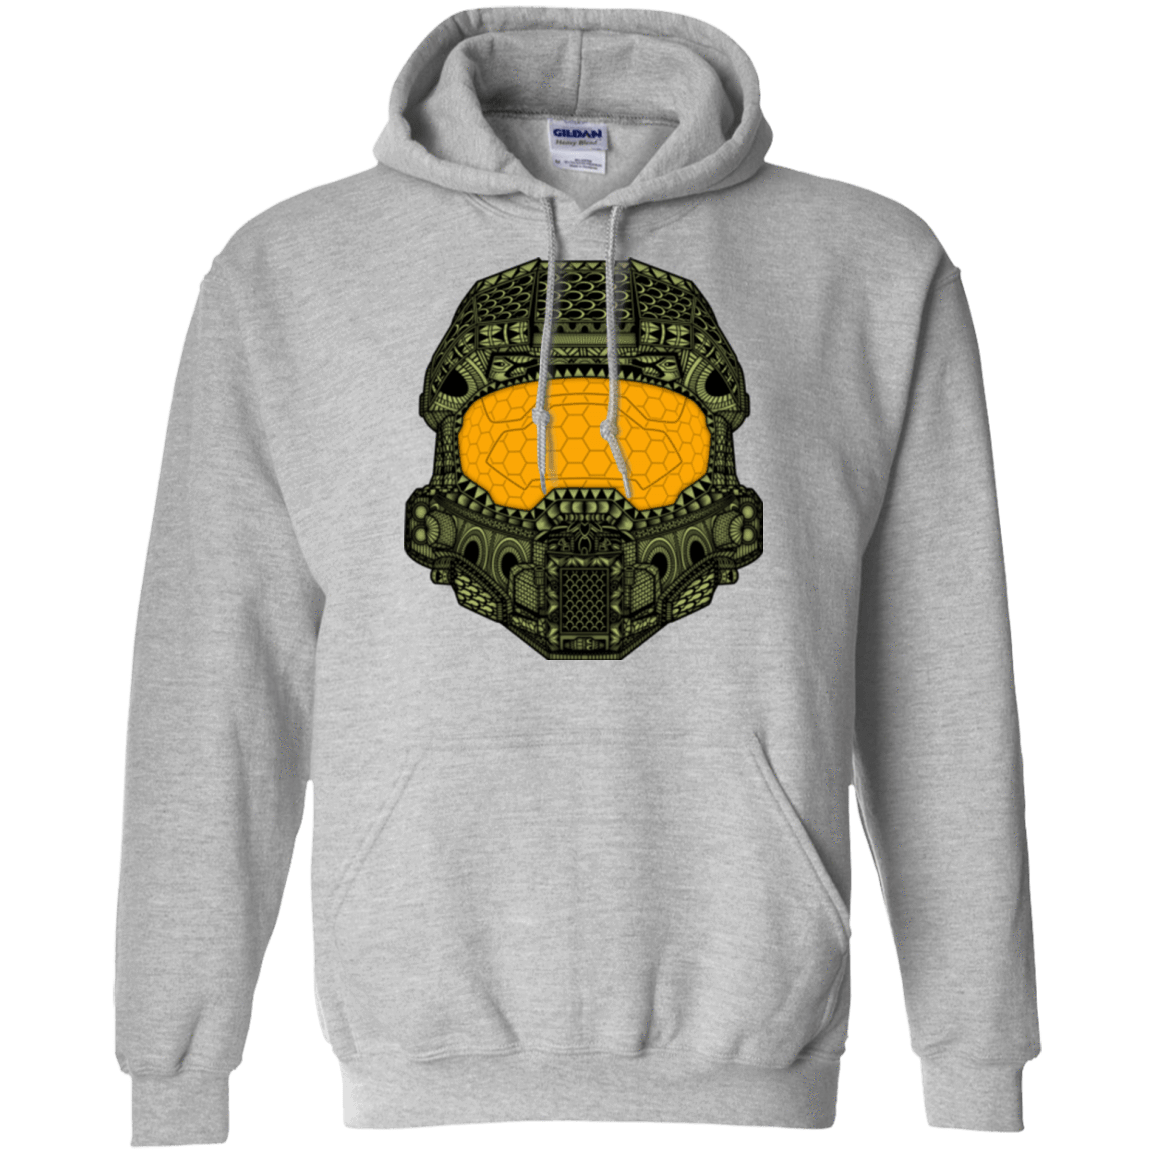 Sweatshirts Sport Grey / Small The Chief Pullover Hoodie